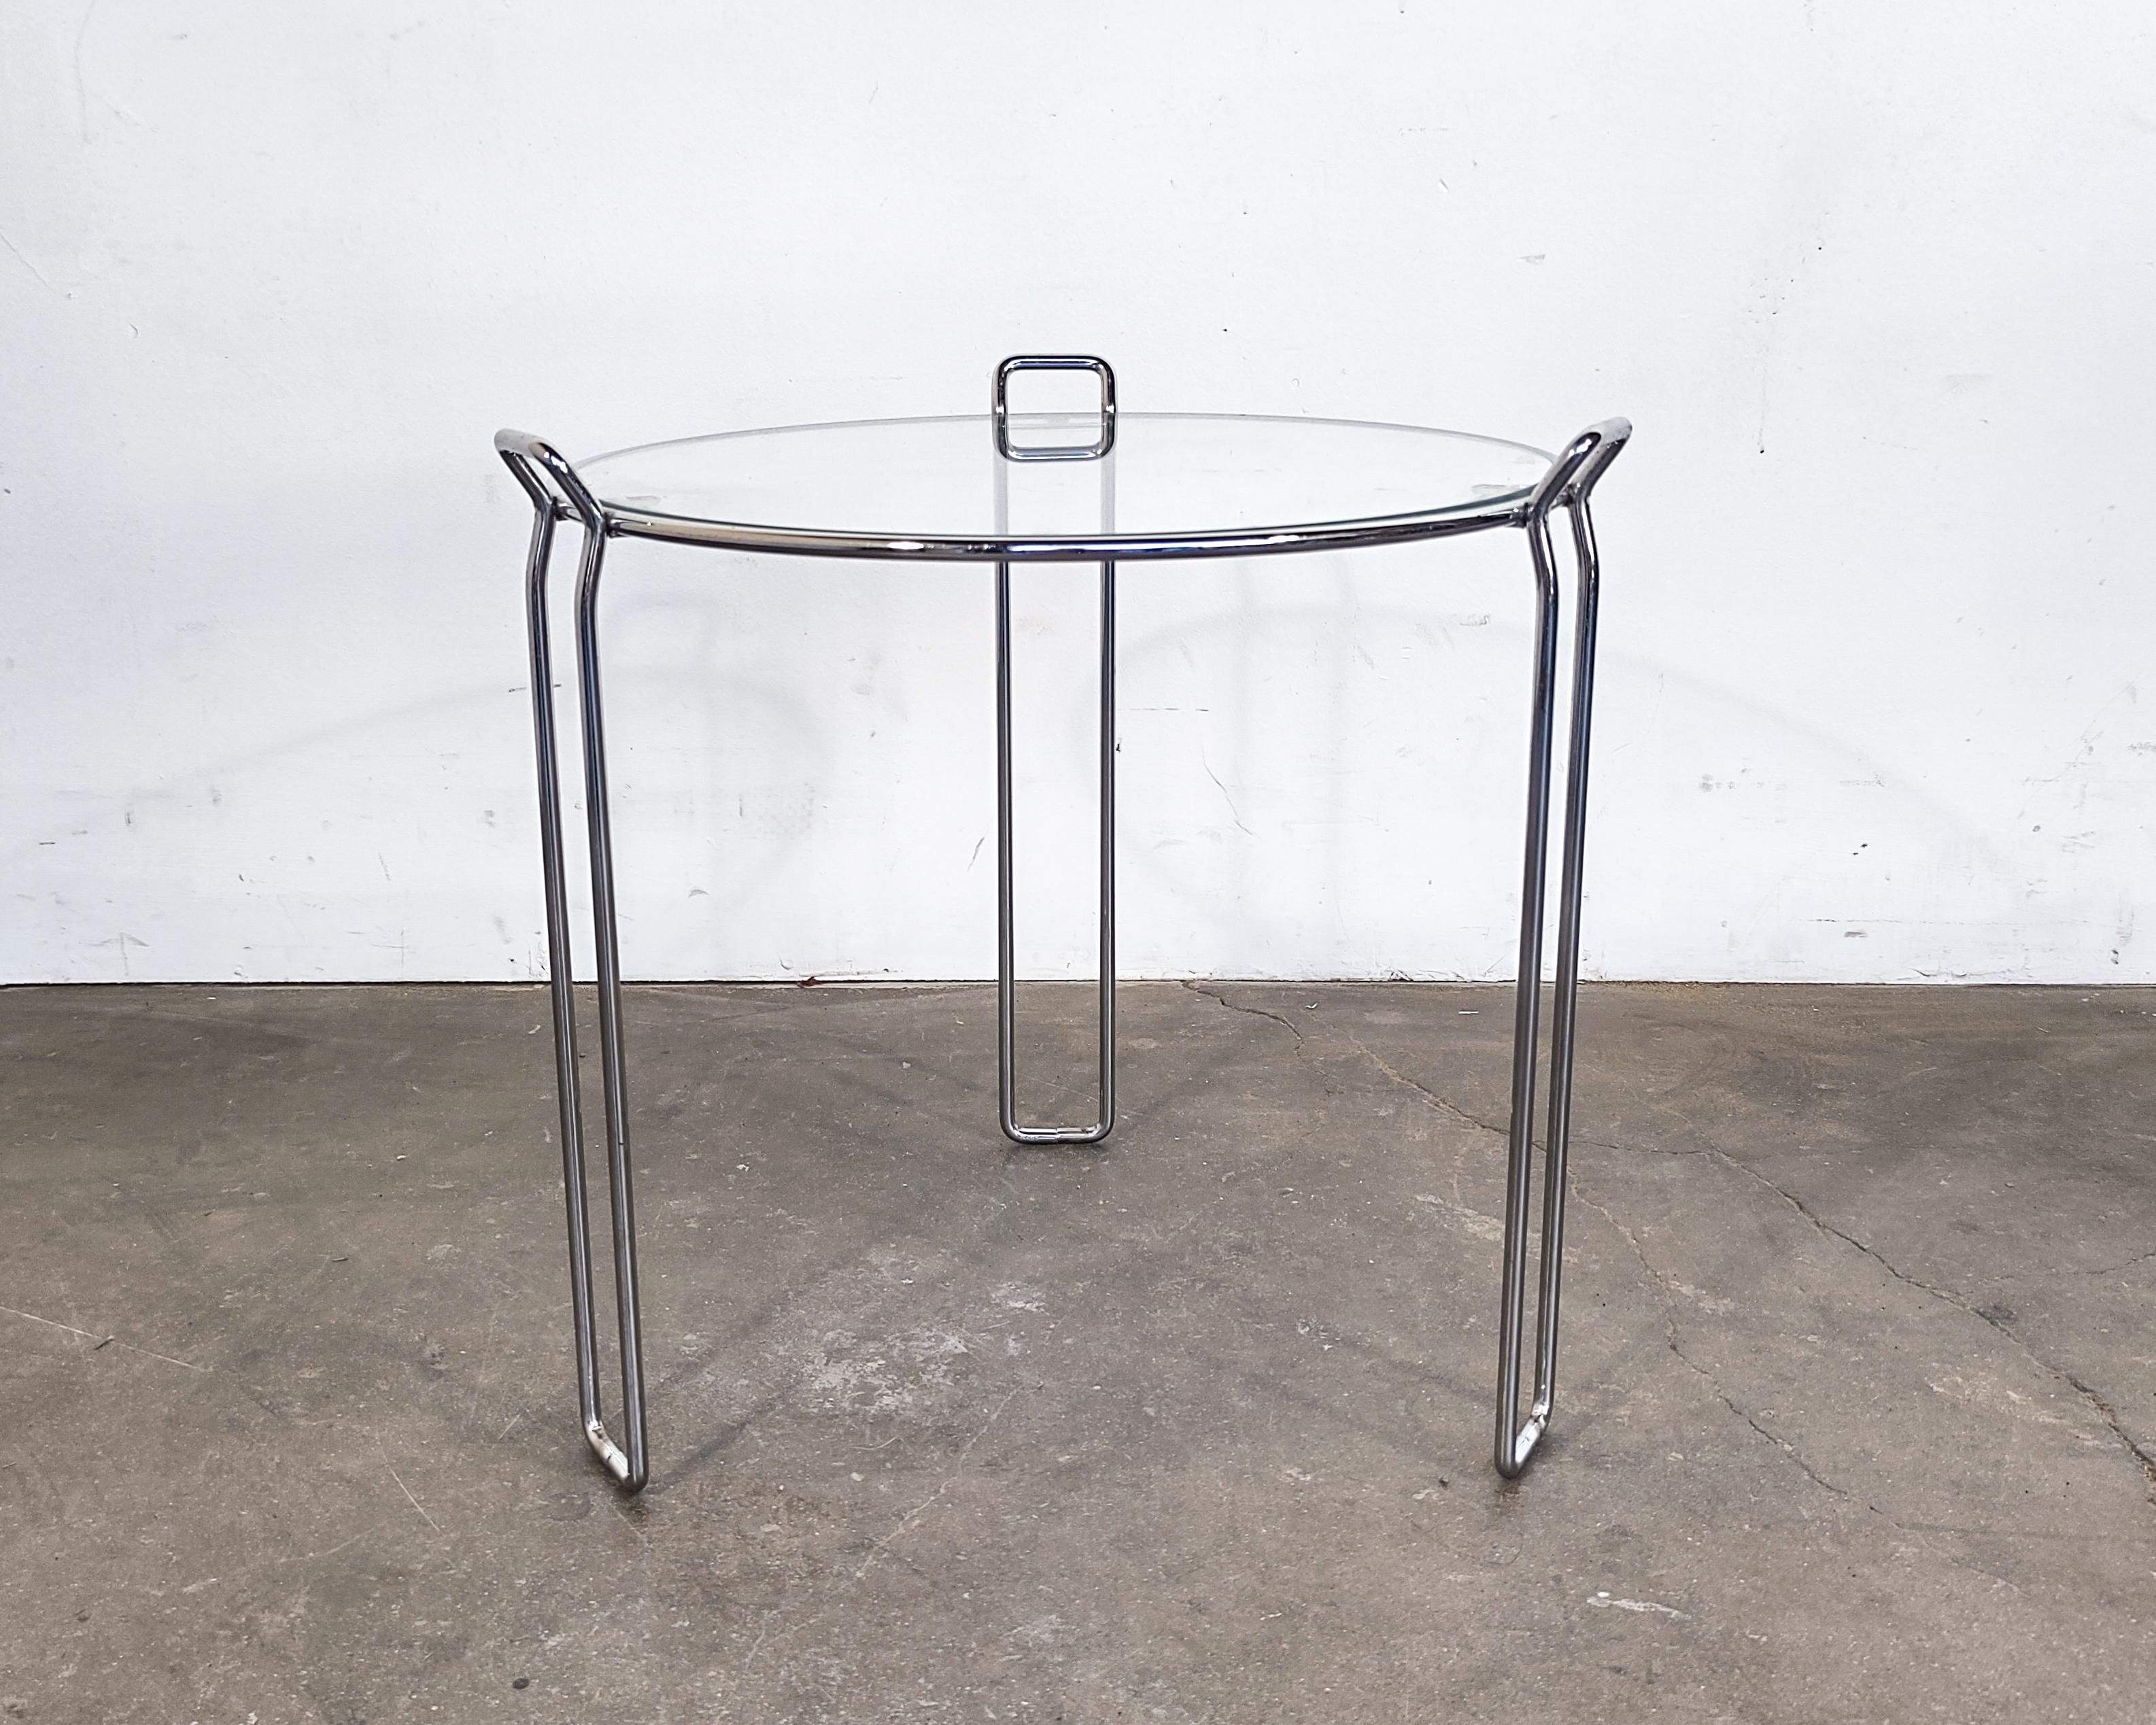 Minimalist wire frame chrome side table with glass top. Tripod base with legs extending into handles. Chrome is mirrored and has very slight surface patina in some areas. Excellent vintage condition, some scratches to glass, no chips.

15.75